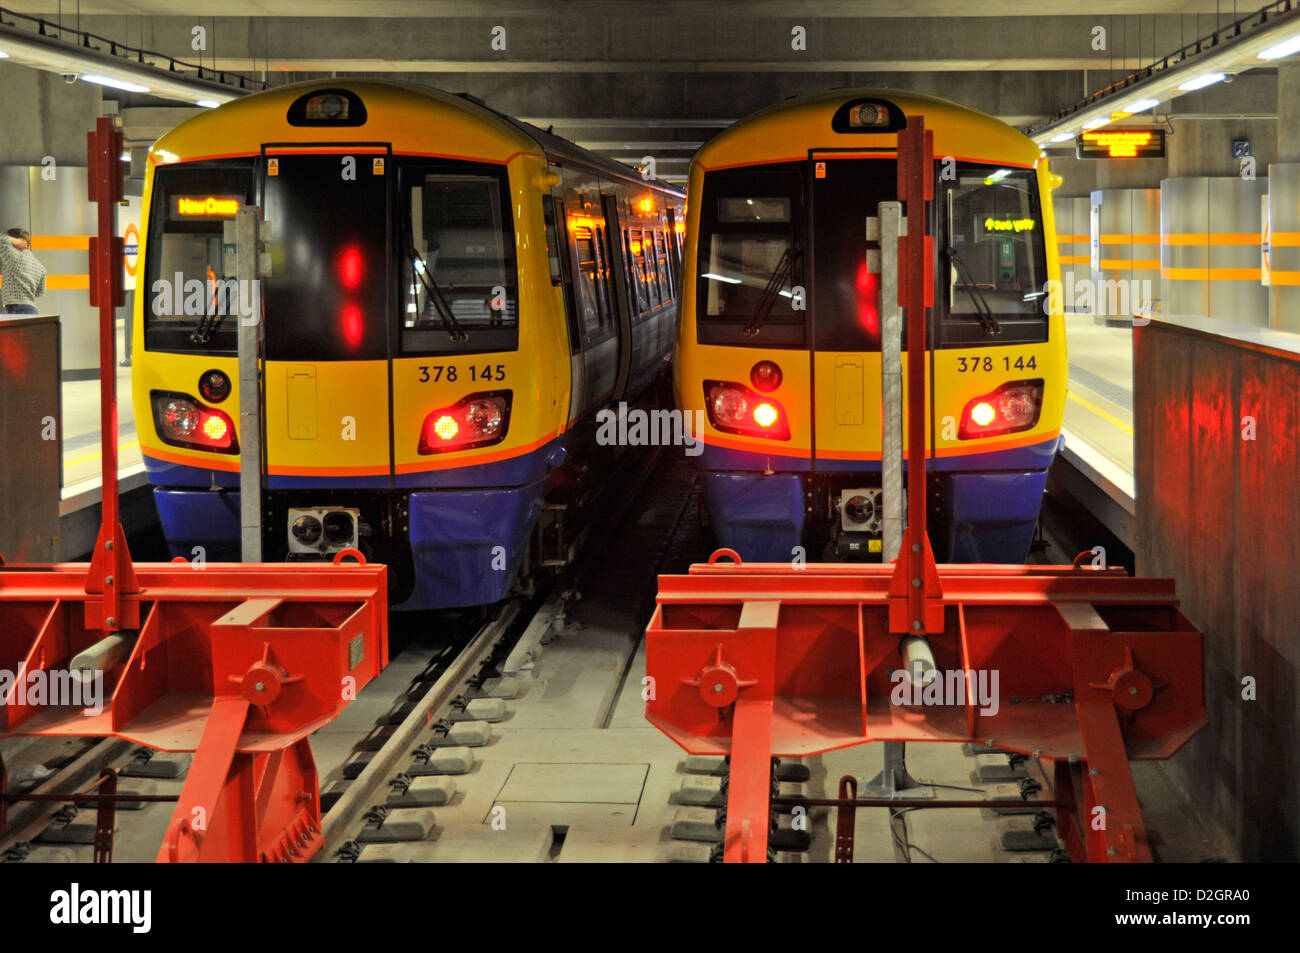 Two of a kind overground trains at terminal station buffers Dalston Junction station London England UK Stock Photo